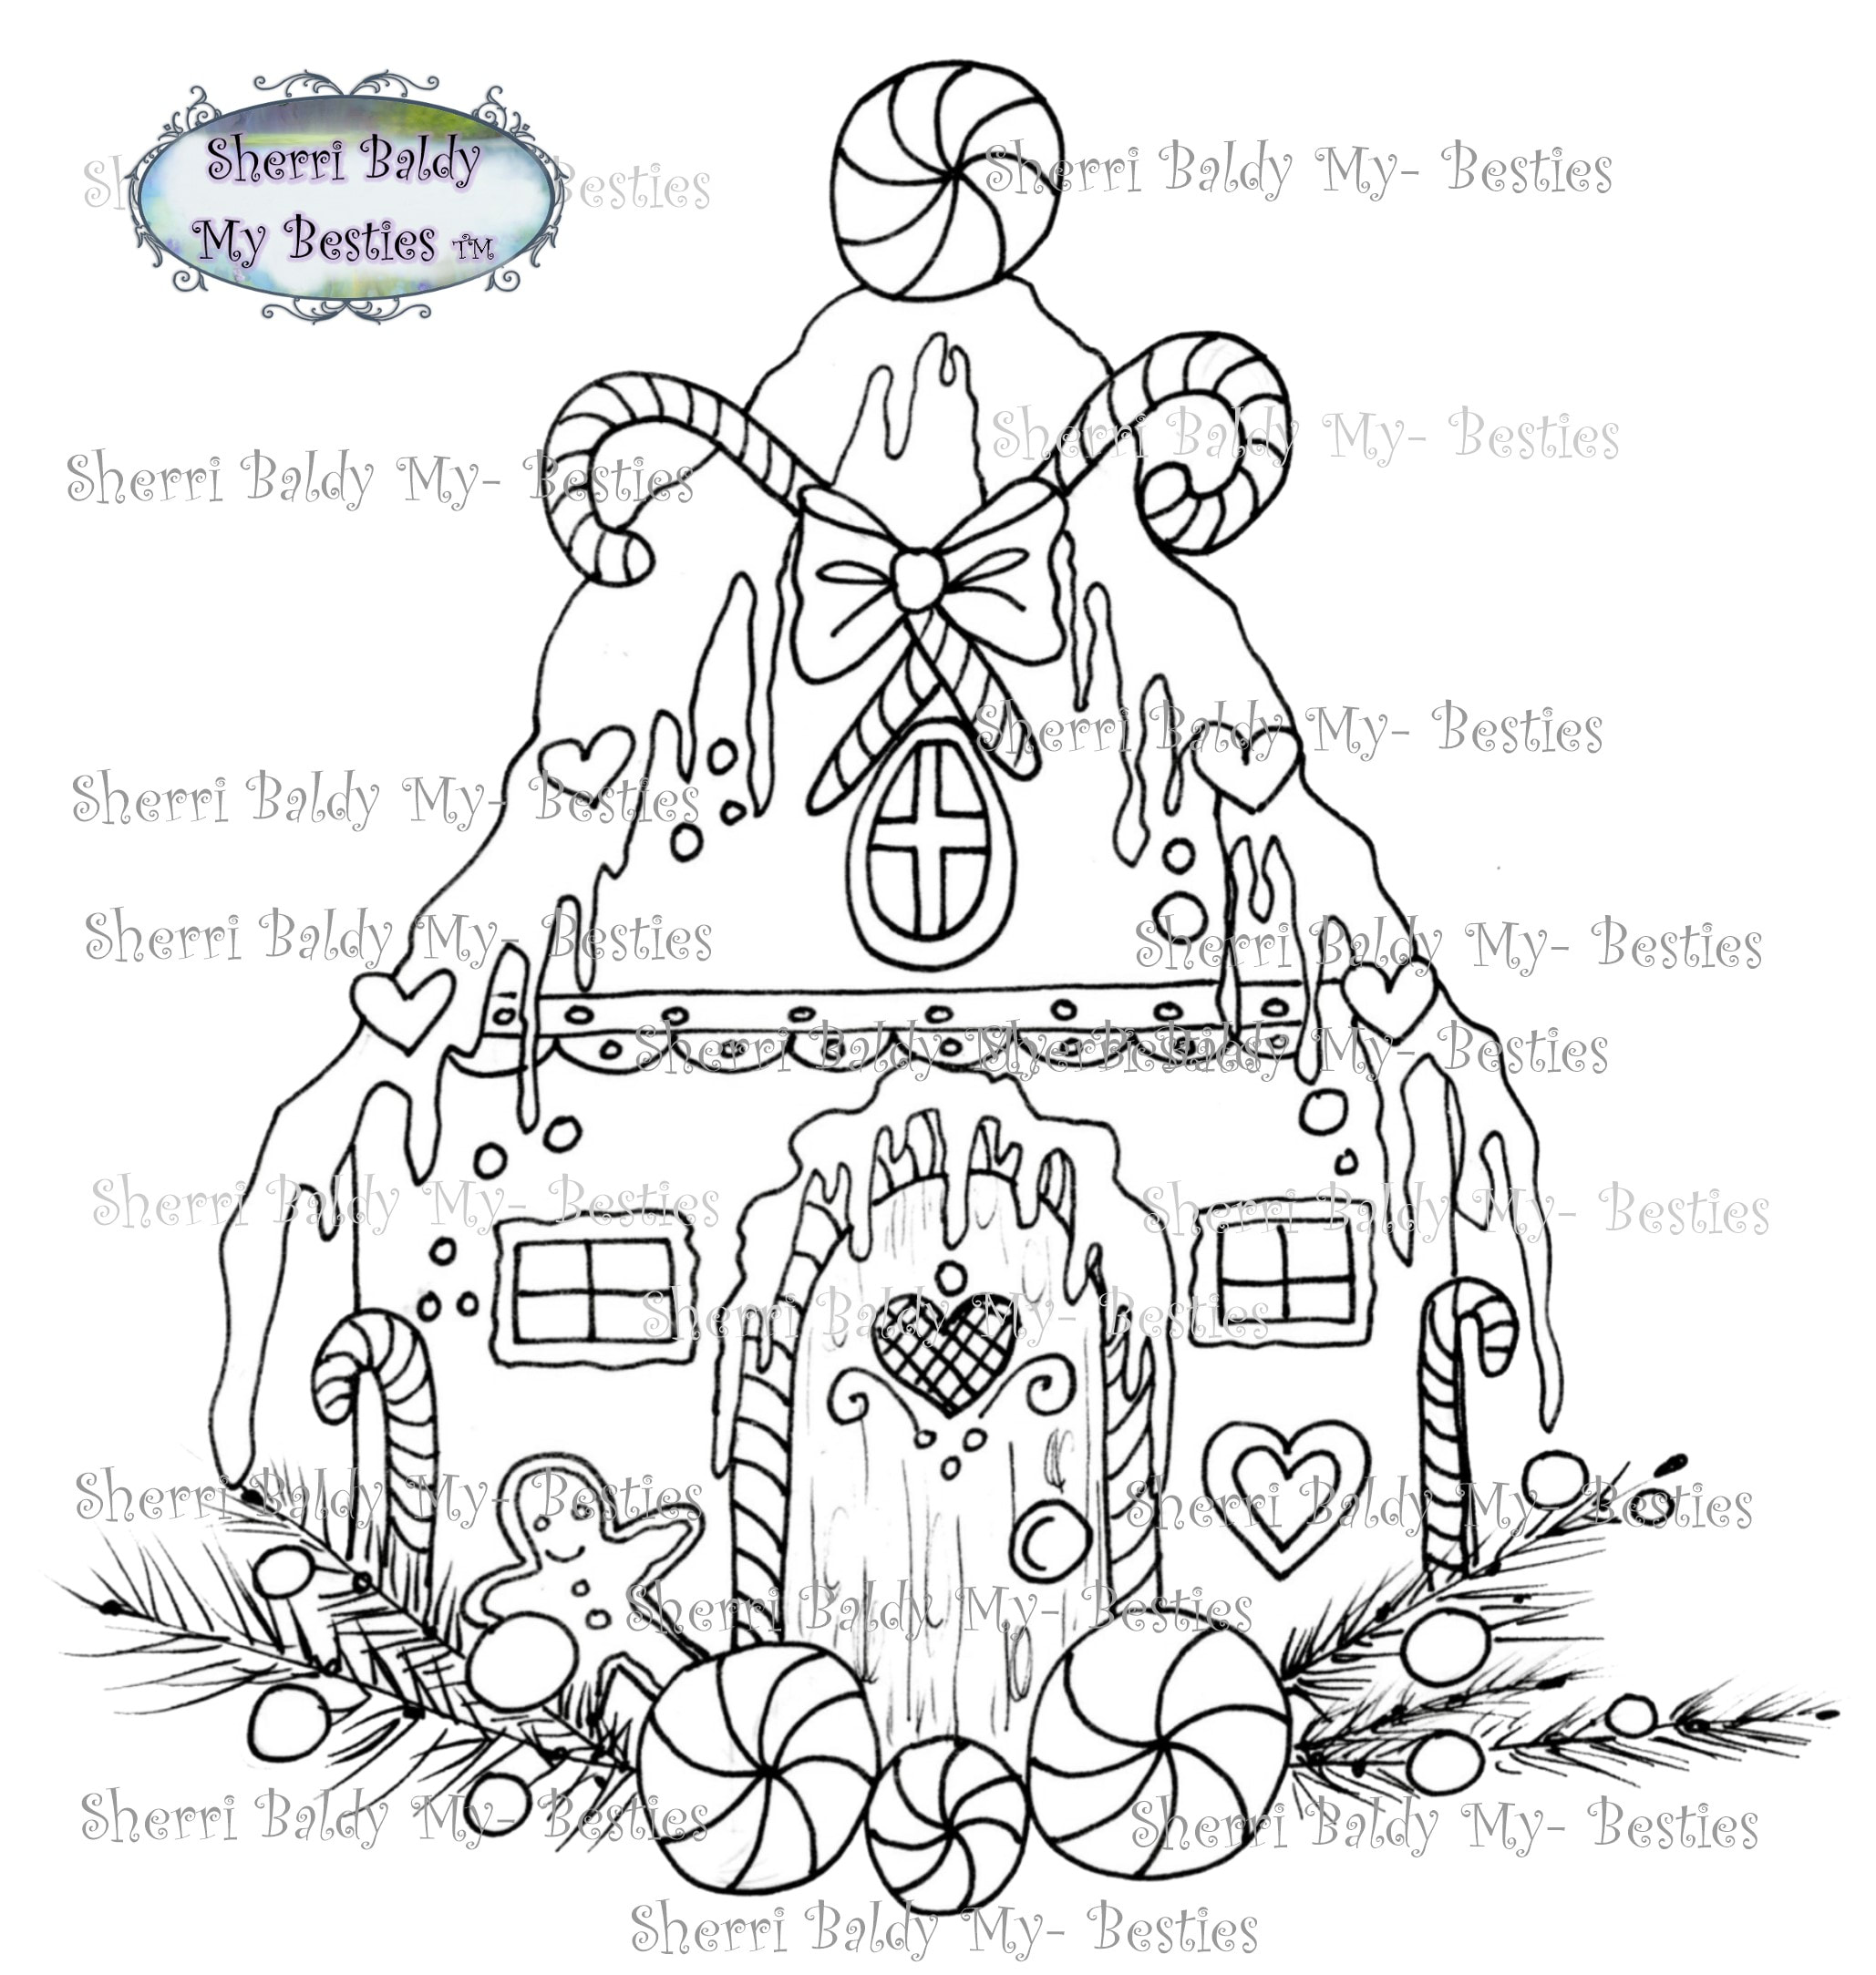 Instant Download Digi Stamp ~ Magical Flower Town Ginger Bread House House  by The Artist Sherri Baldy